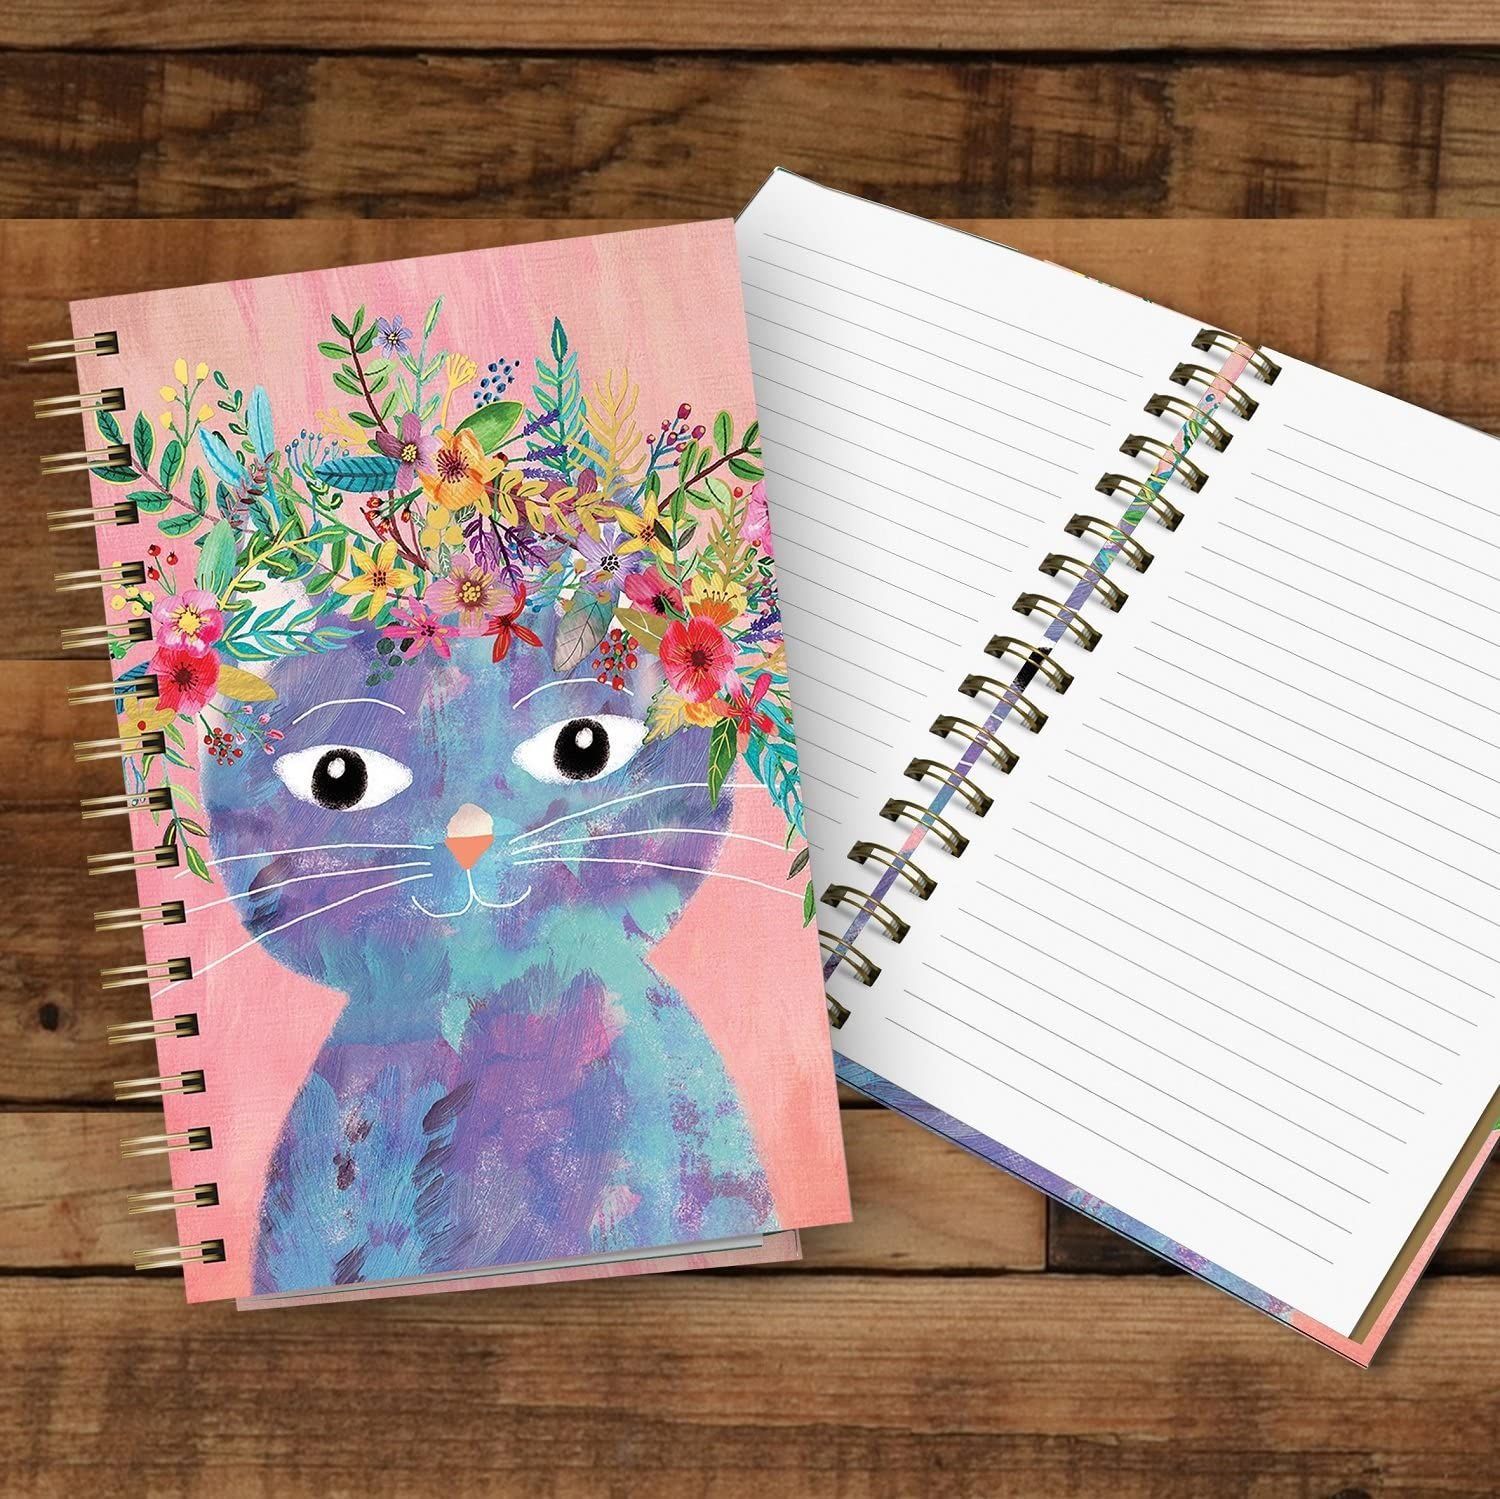 A5 Notepad Set in Illustrative Brown Hare Design